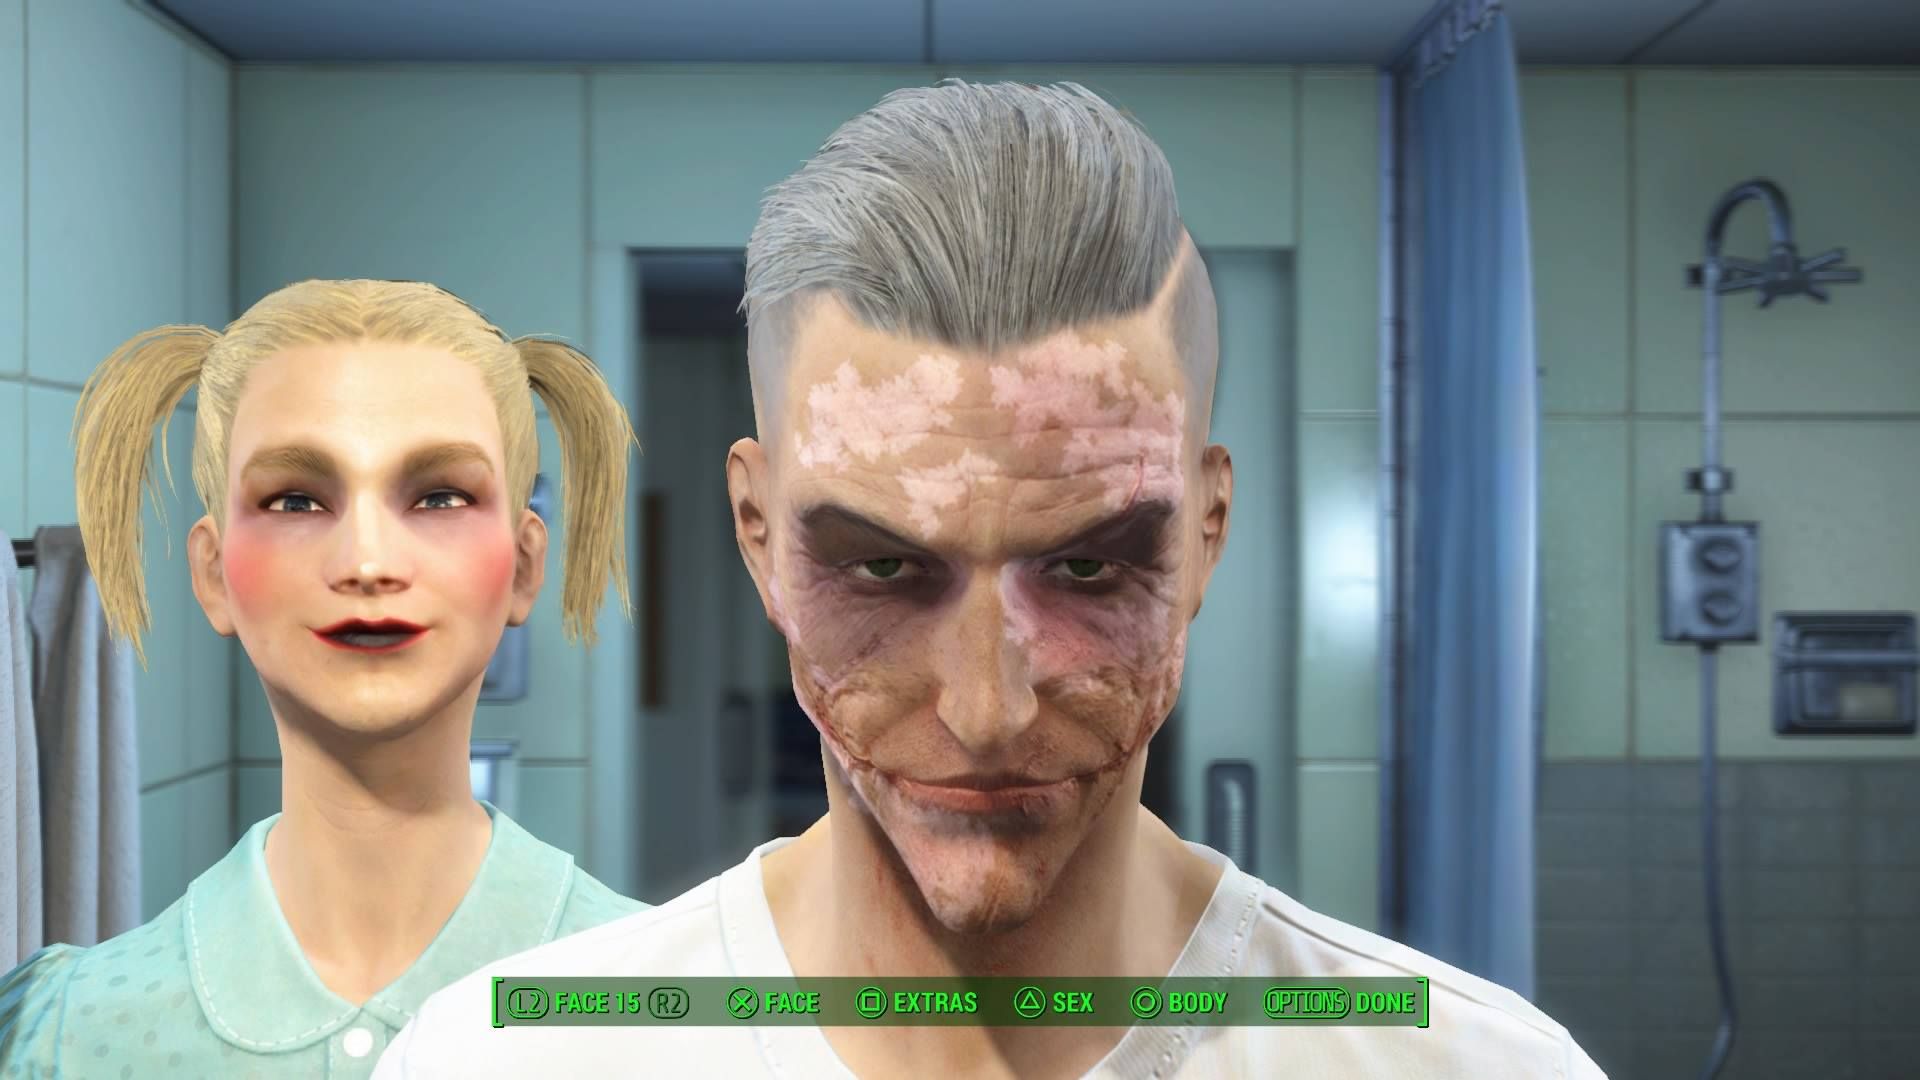 15 Reasons Fallout 4 Is WAY Better Than Fallout New Vegas